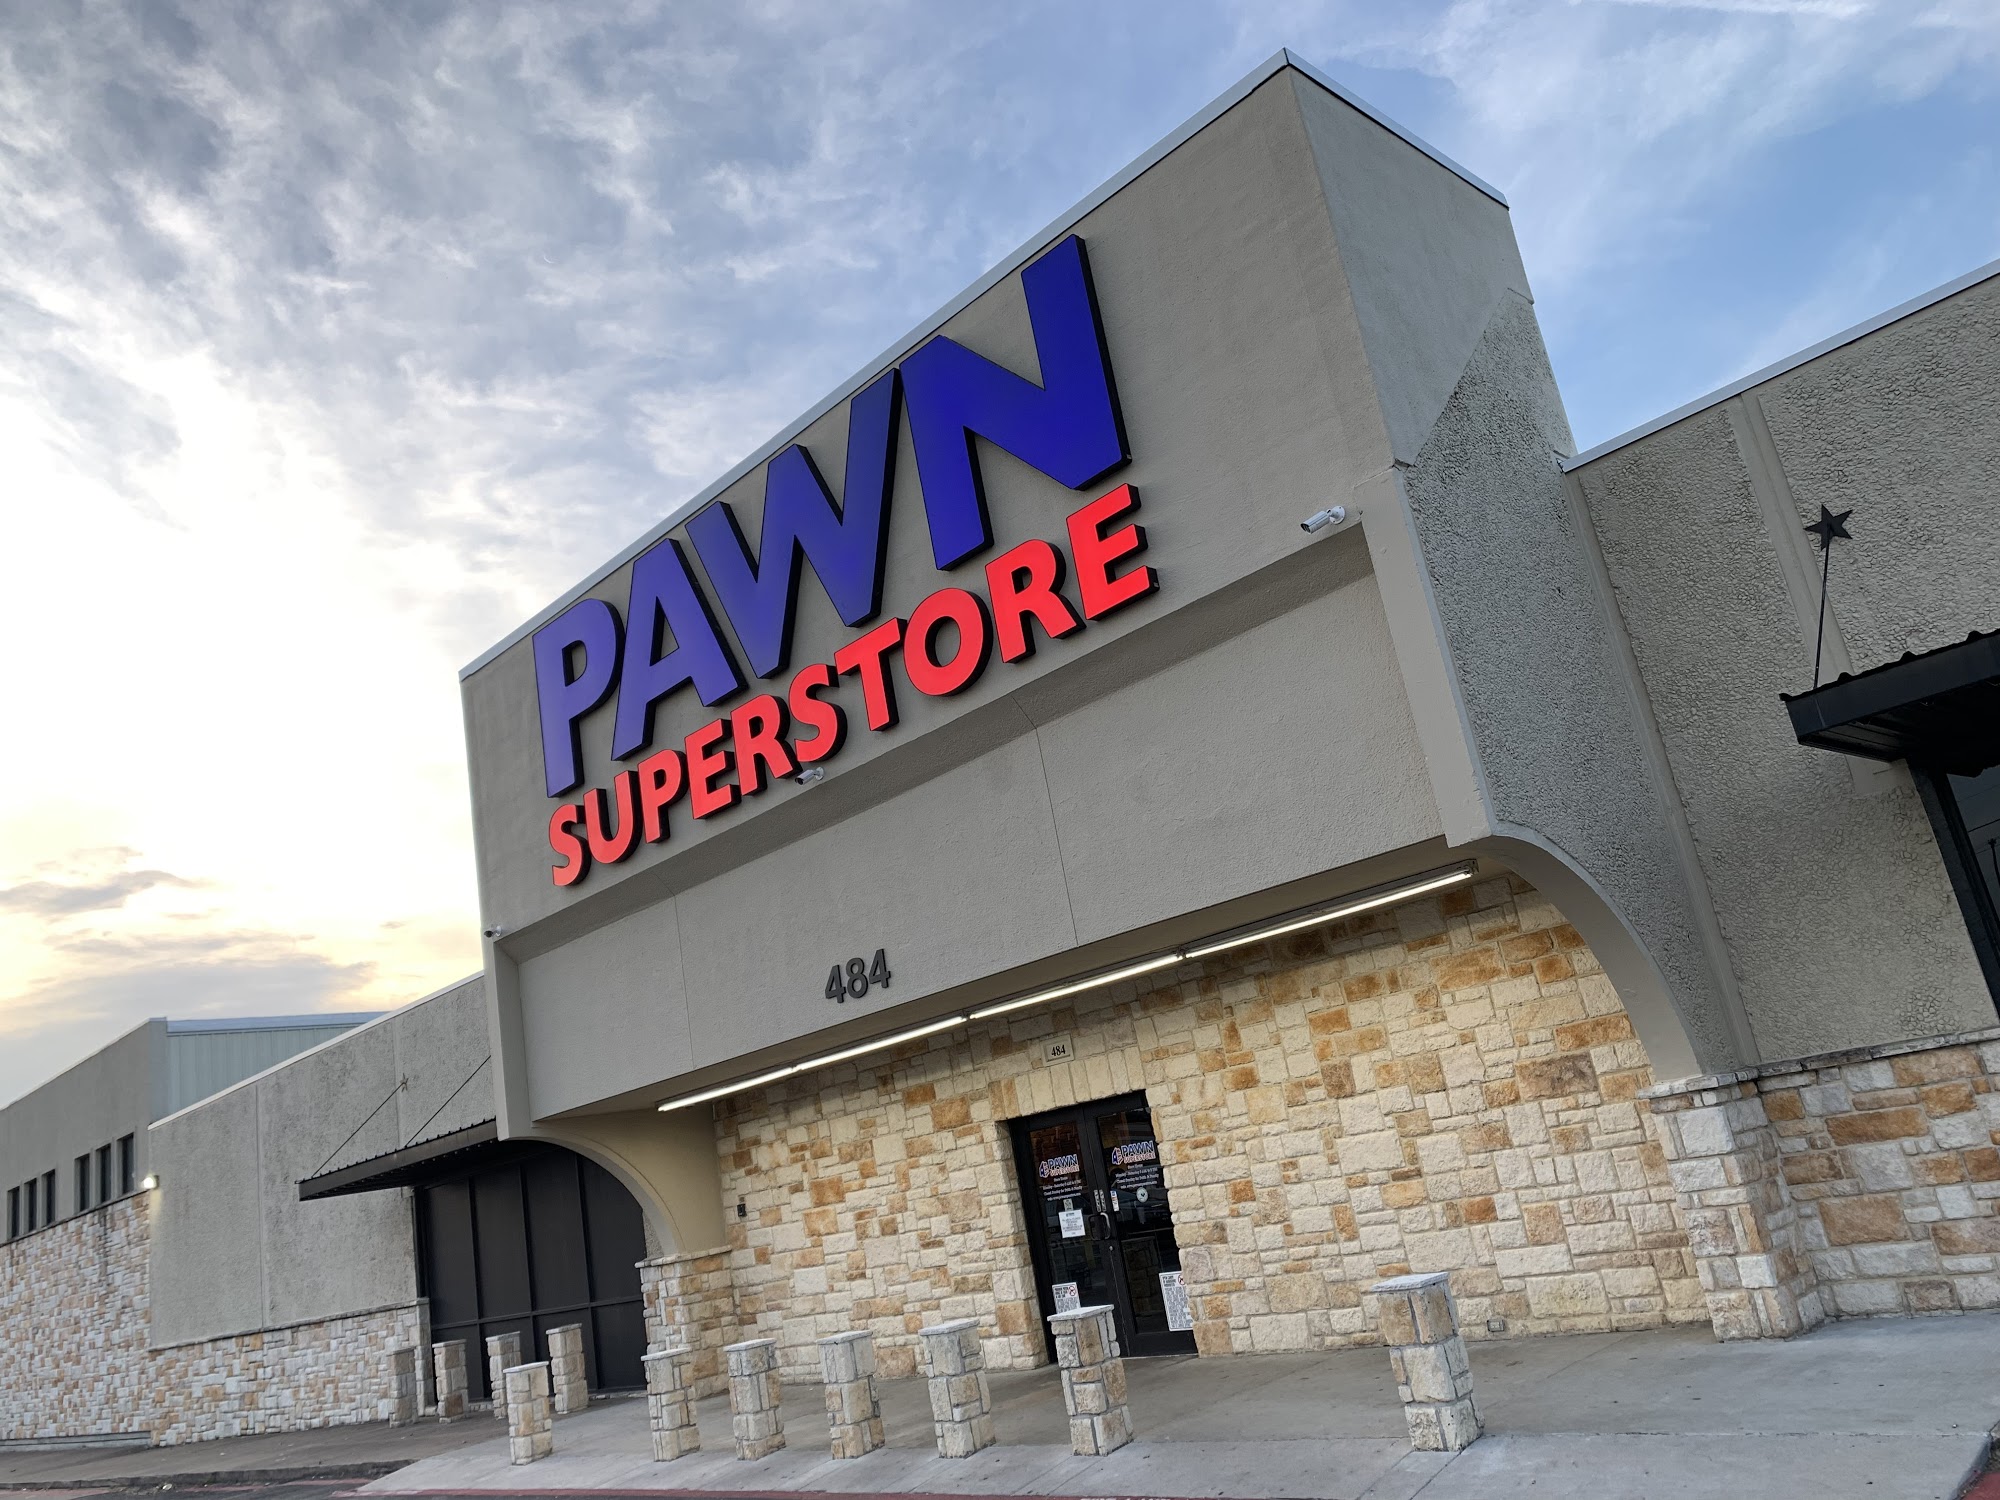 Pawn Superstore